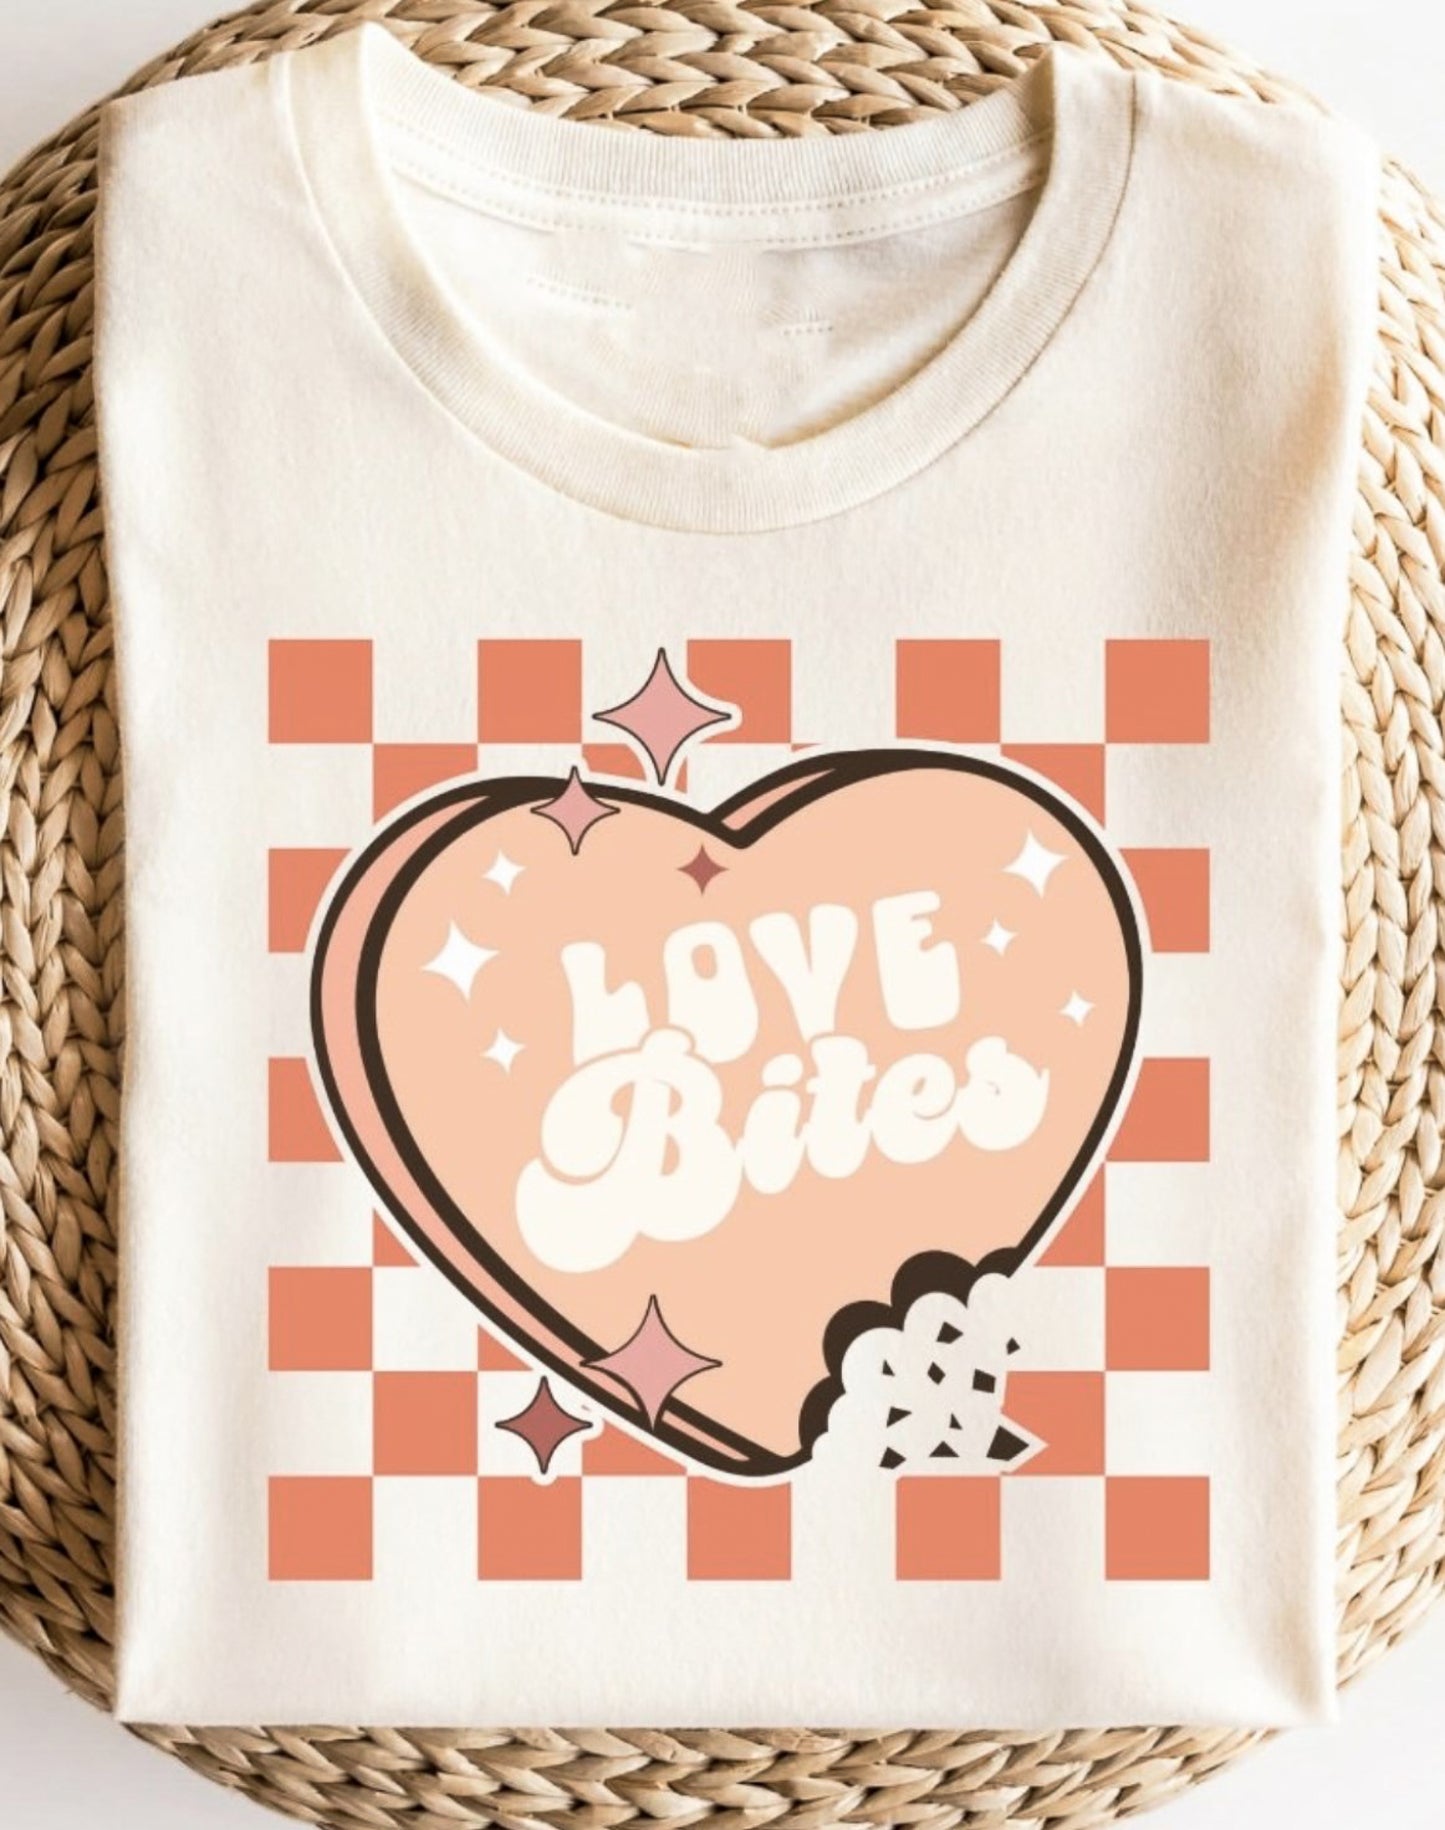 Love Bites Heart With Checkered Background Tee